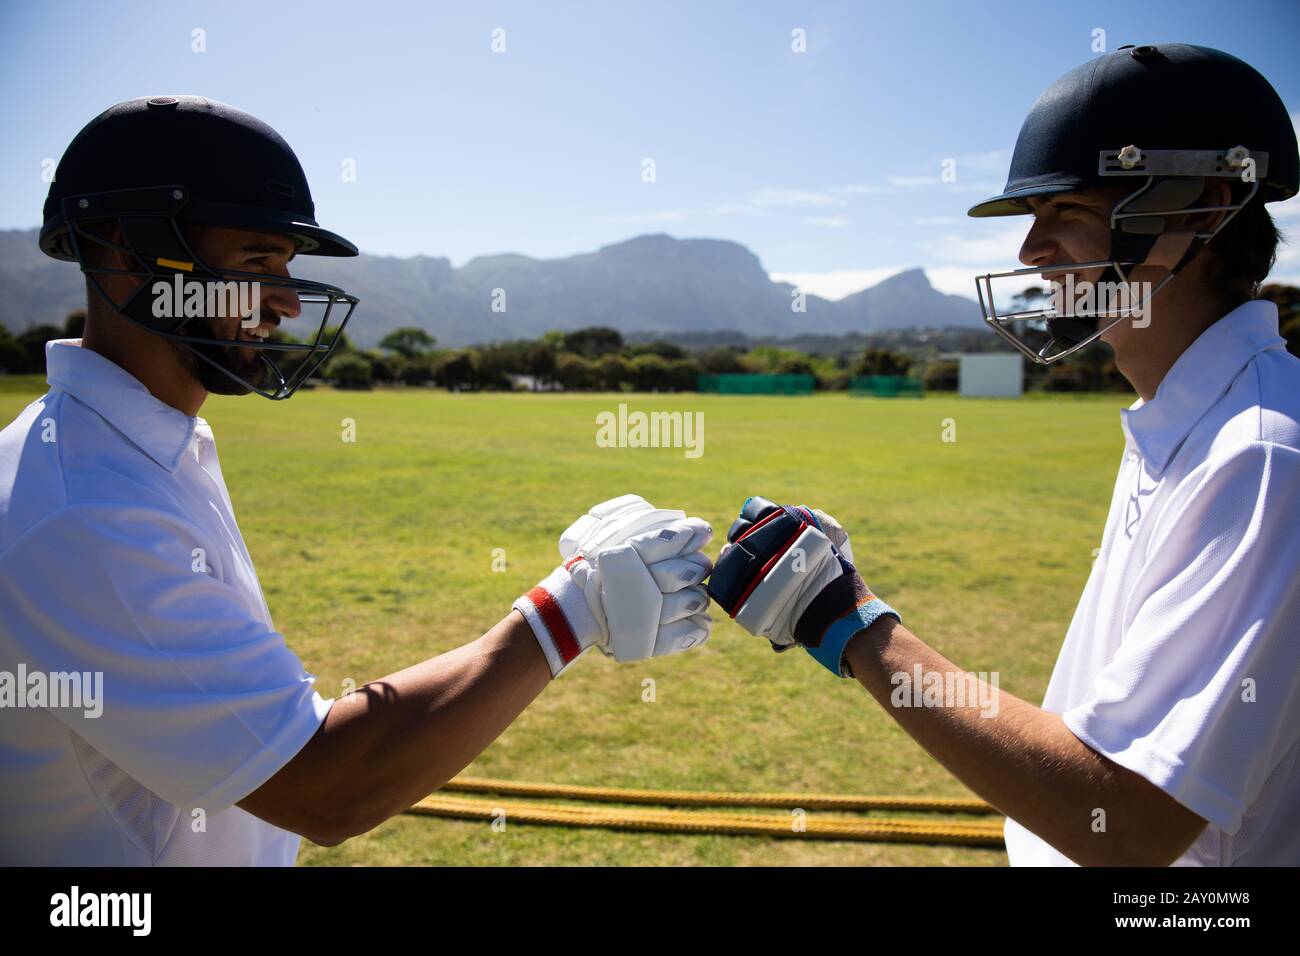 Cricket players doing a check on a pitch Stock Photo